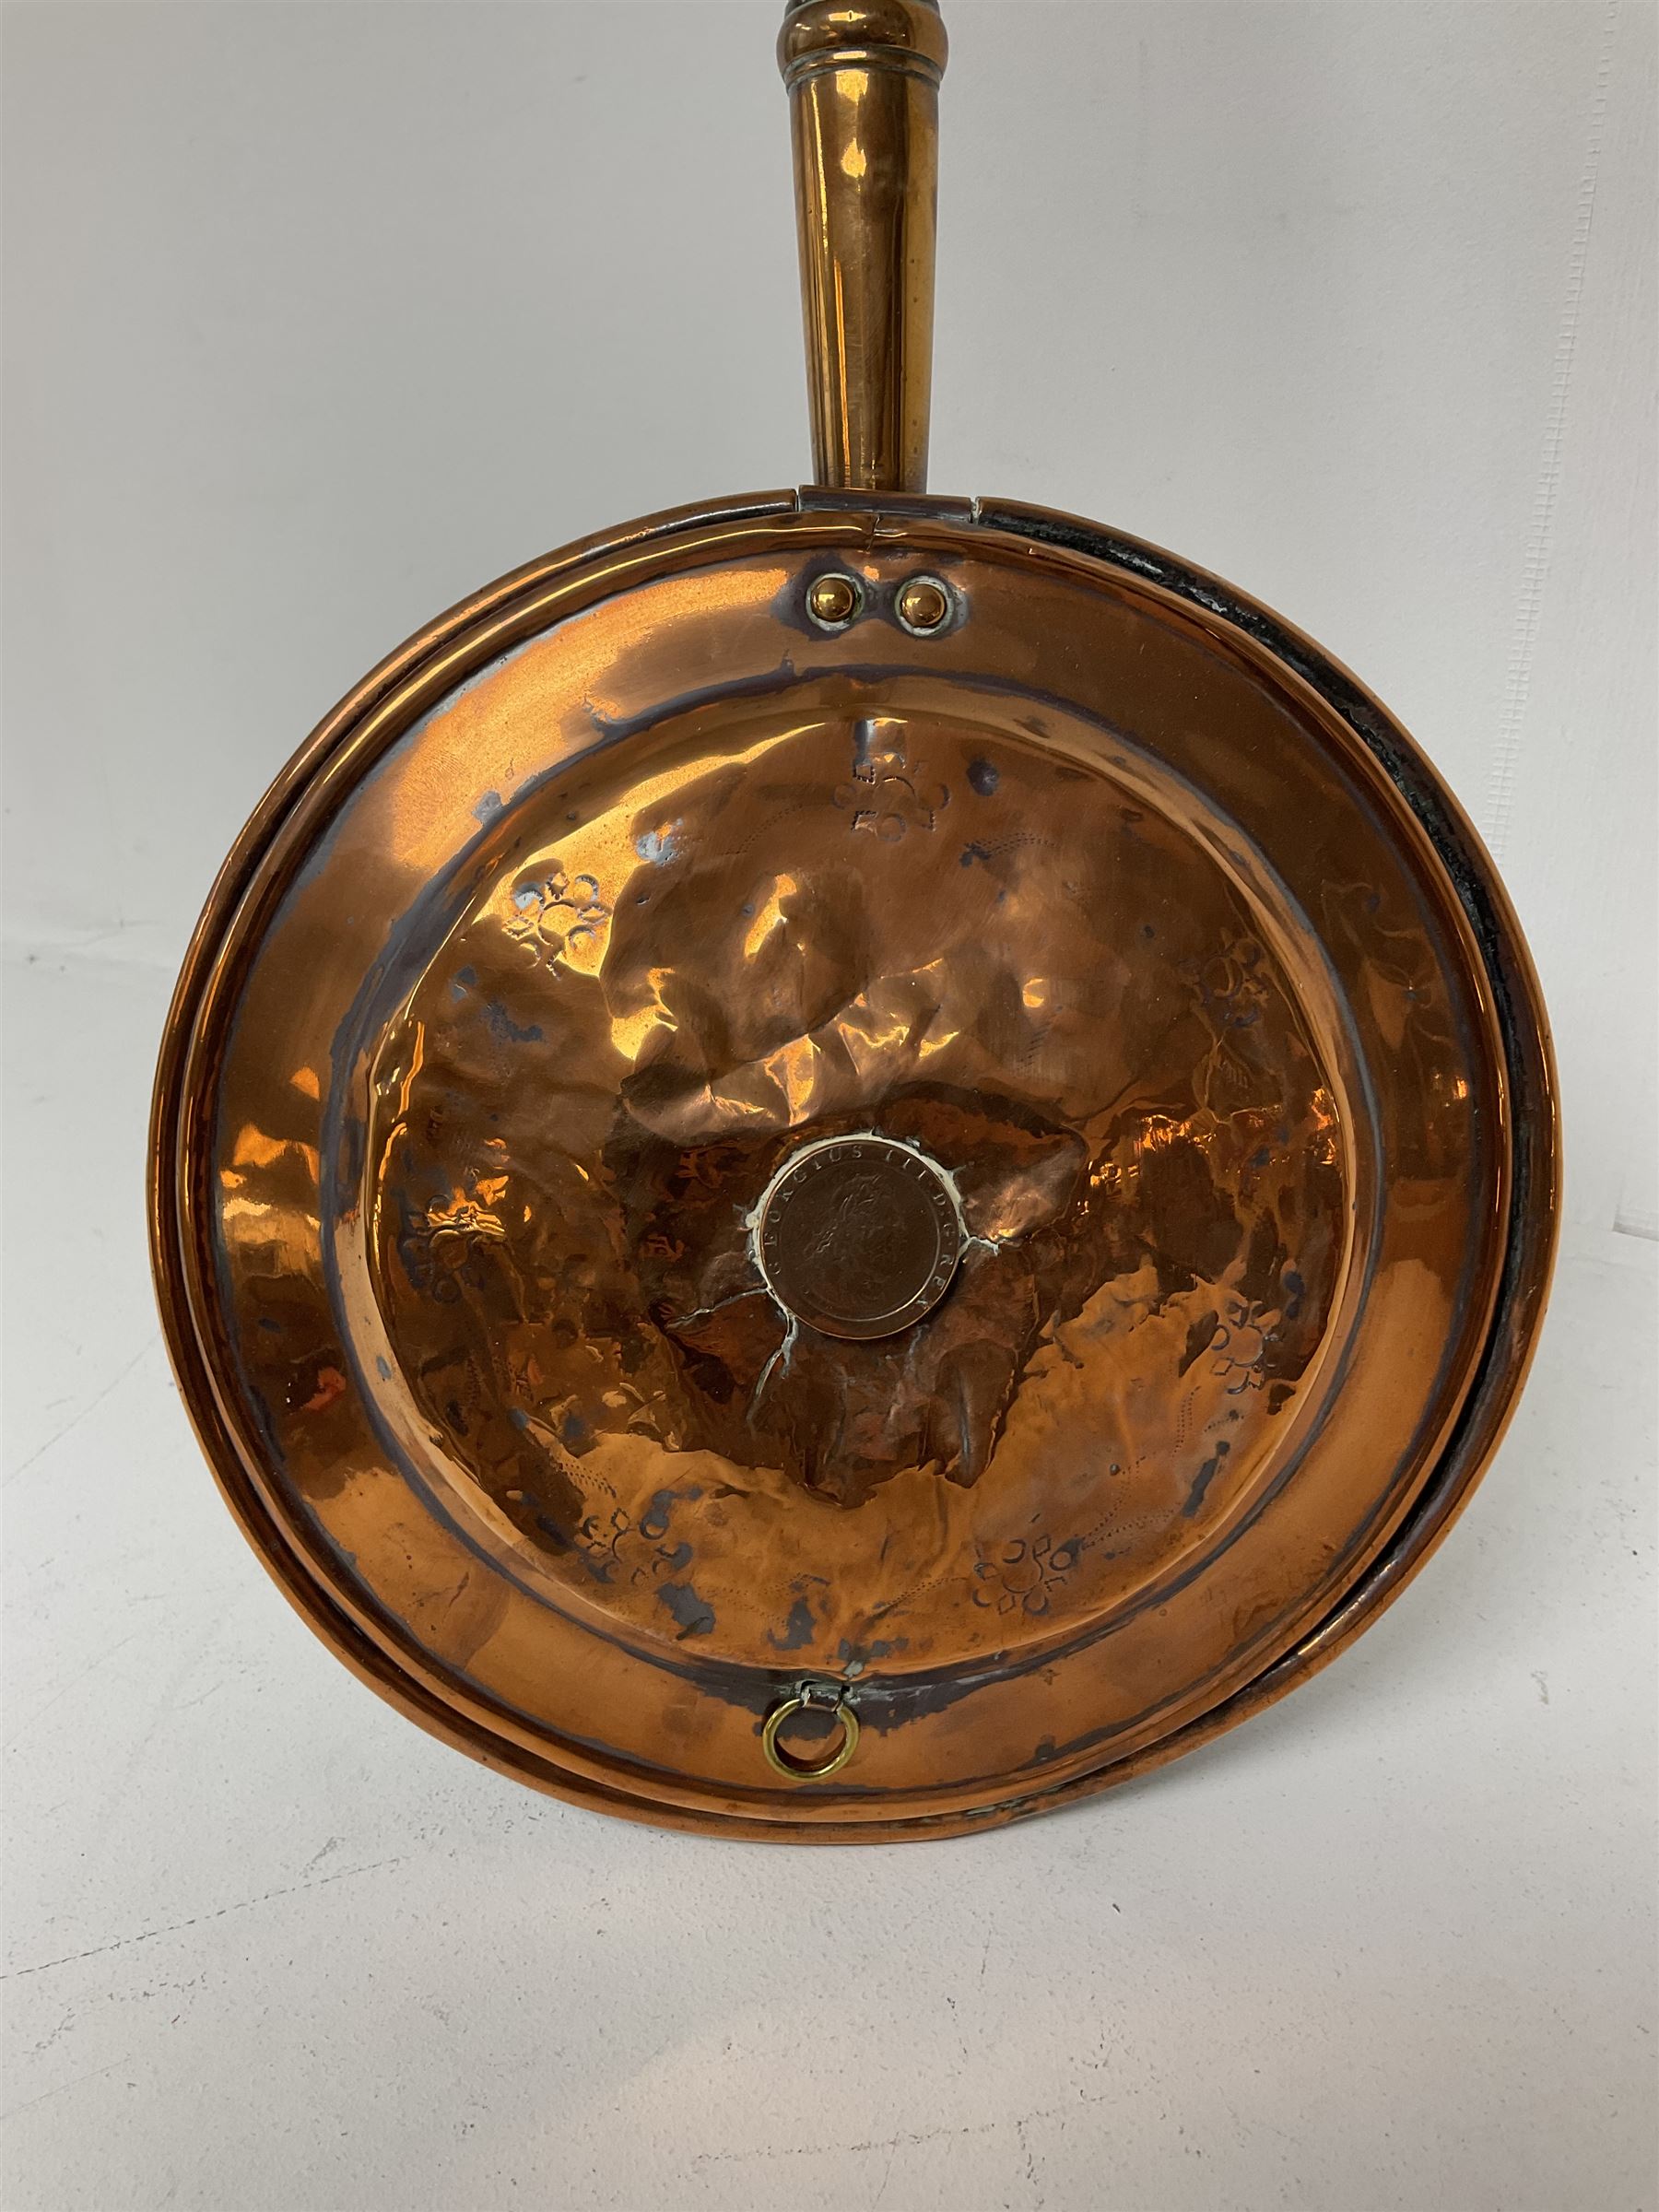 Copper bed pan with George cartwheel penny coin motif - Image 2 of 2